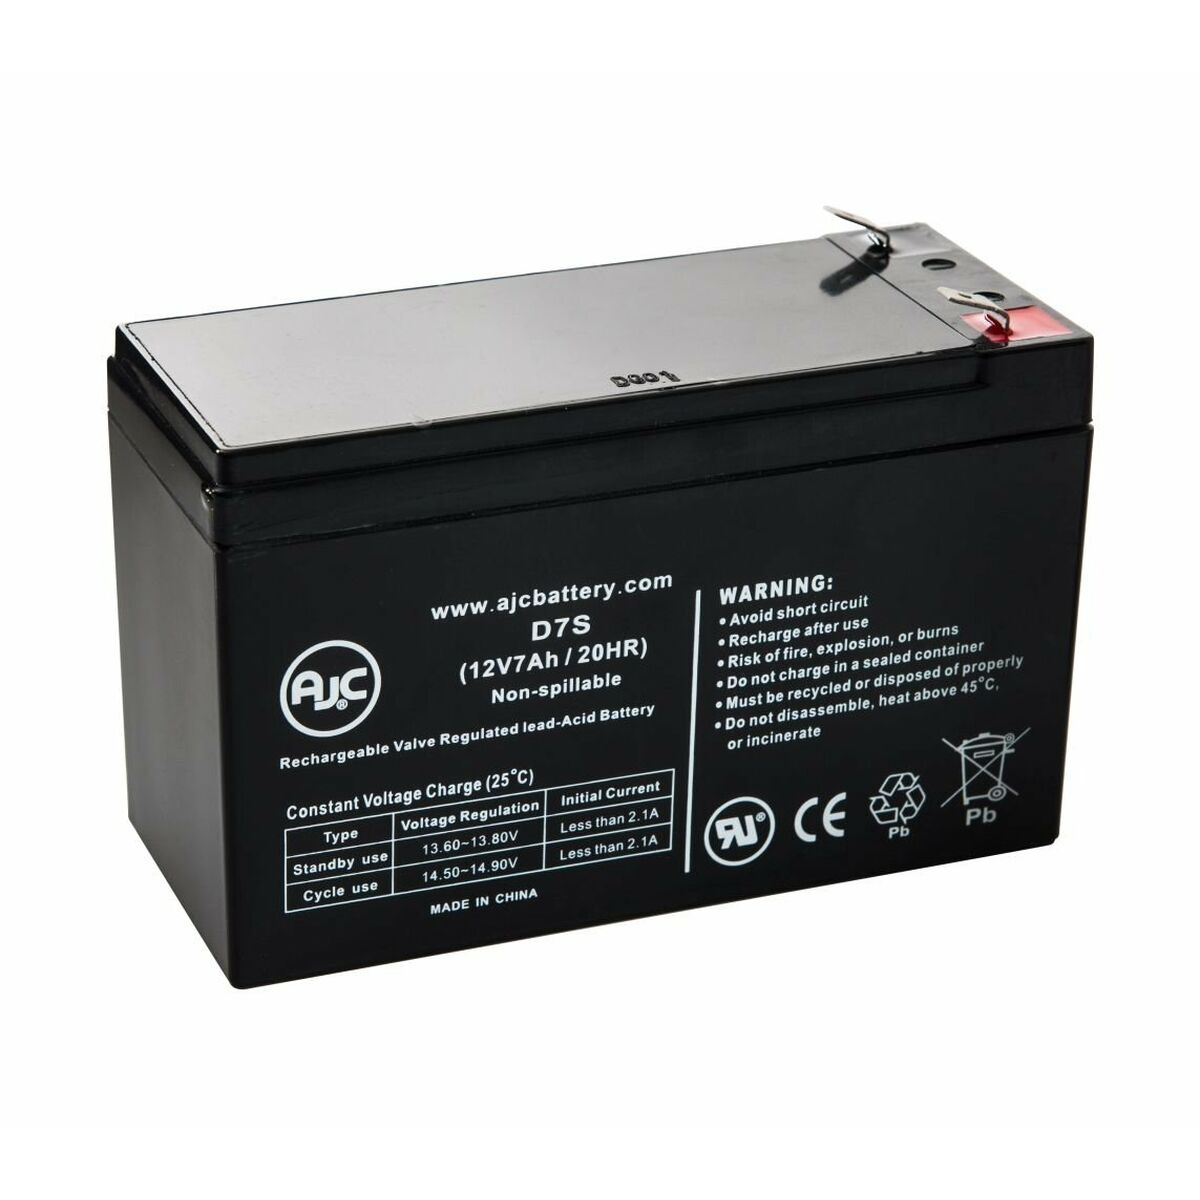 Battery for Uninterruptible Power Supply System UPS APC SURT48RMXLBP 48 V, APC, Computing, Accessories, battery-for-uninterruptible-power-supply-system-ups-apc-surt48rmxlbp-48-v, Brand_APC, category-reference-2609, category-reference-2642, category-reference-2845, category-reference-t-19685, category-reference-t-19908, category-reference-t-21341, computers / peripherals, Condition_NEW, office, Price_+ 1000, Teleworking, RiotNook